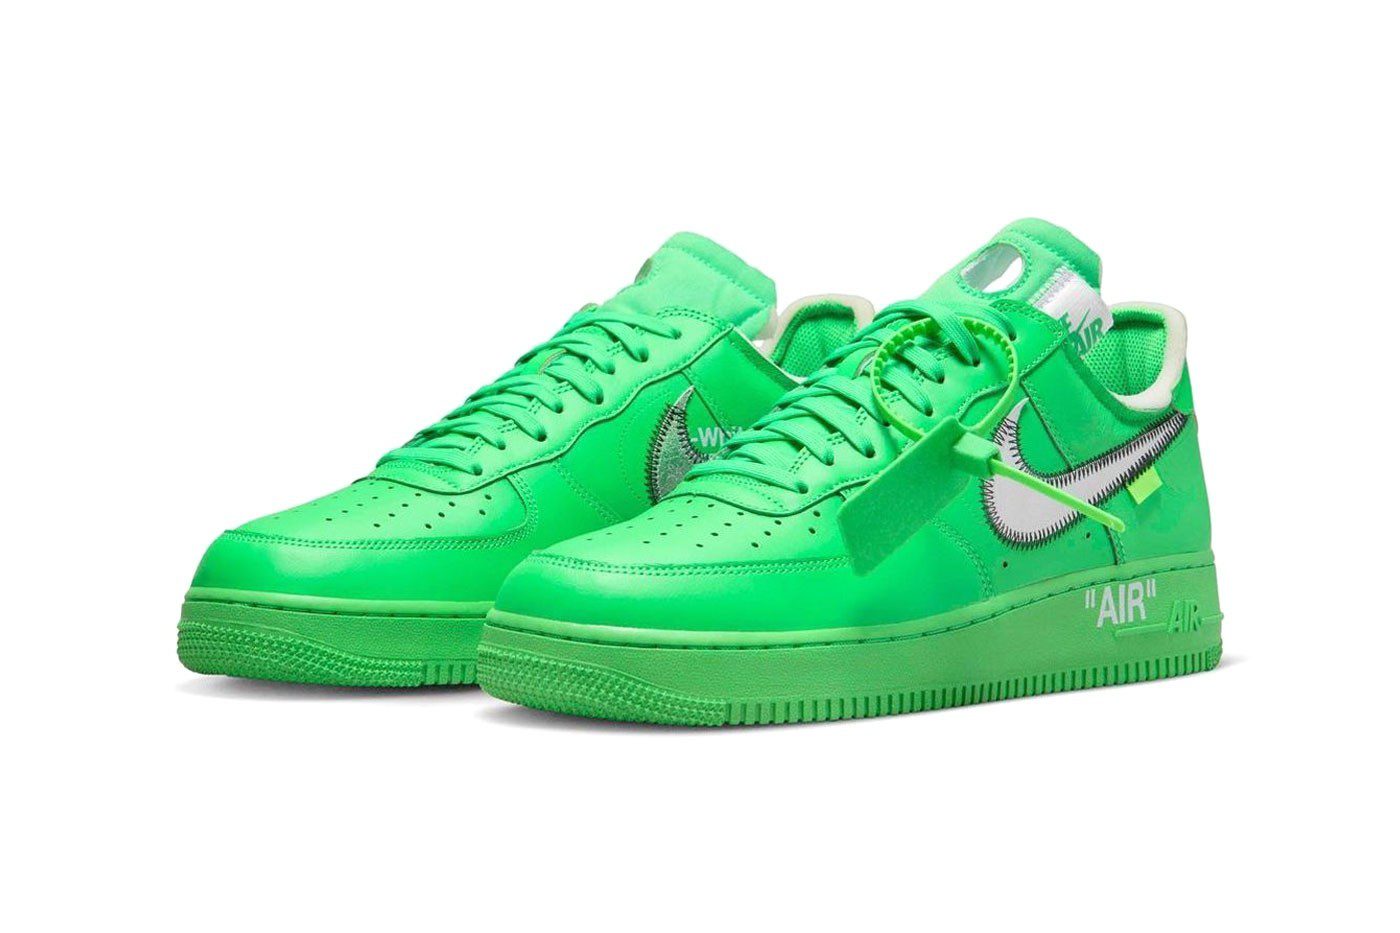 Capa Off-White x Nike Air Force 1 Low "Green Spark"